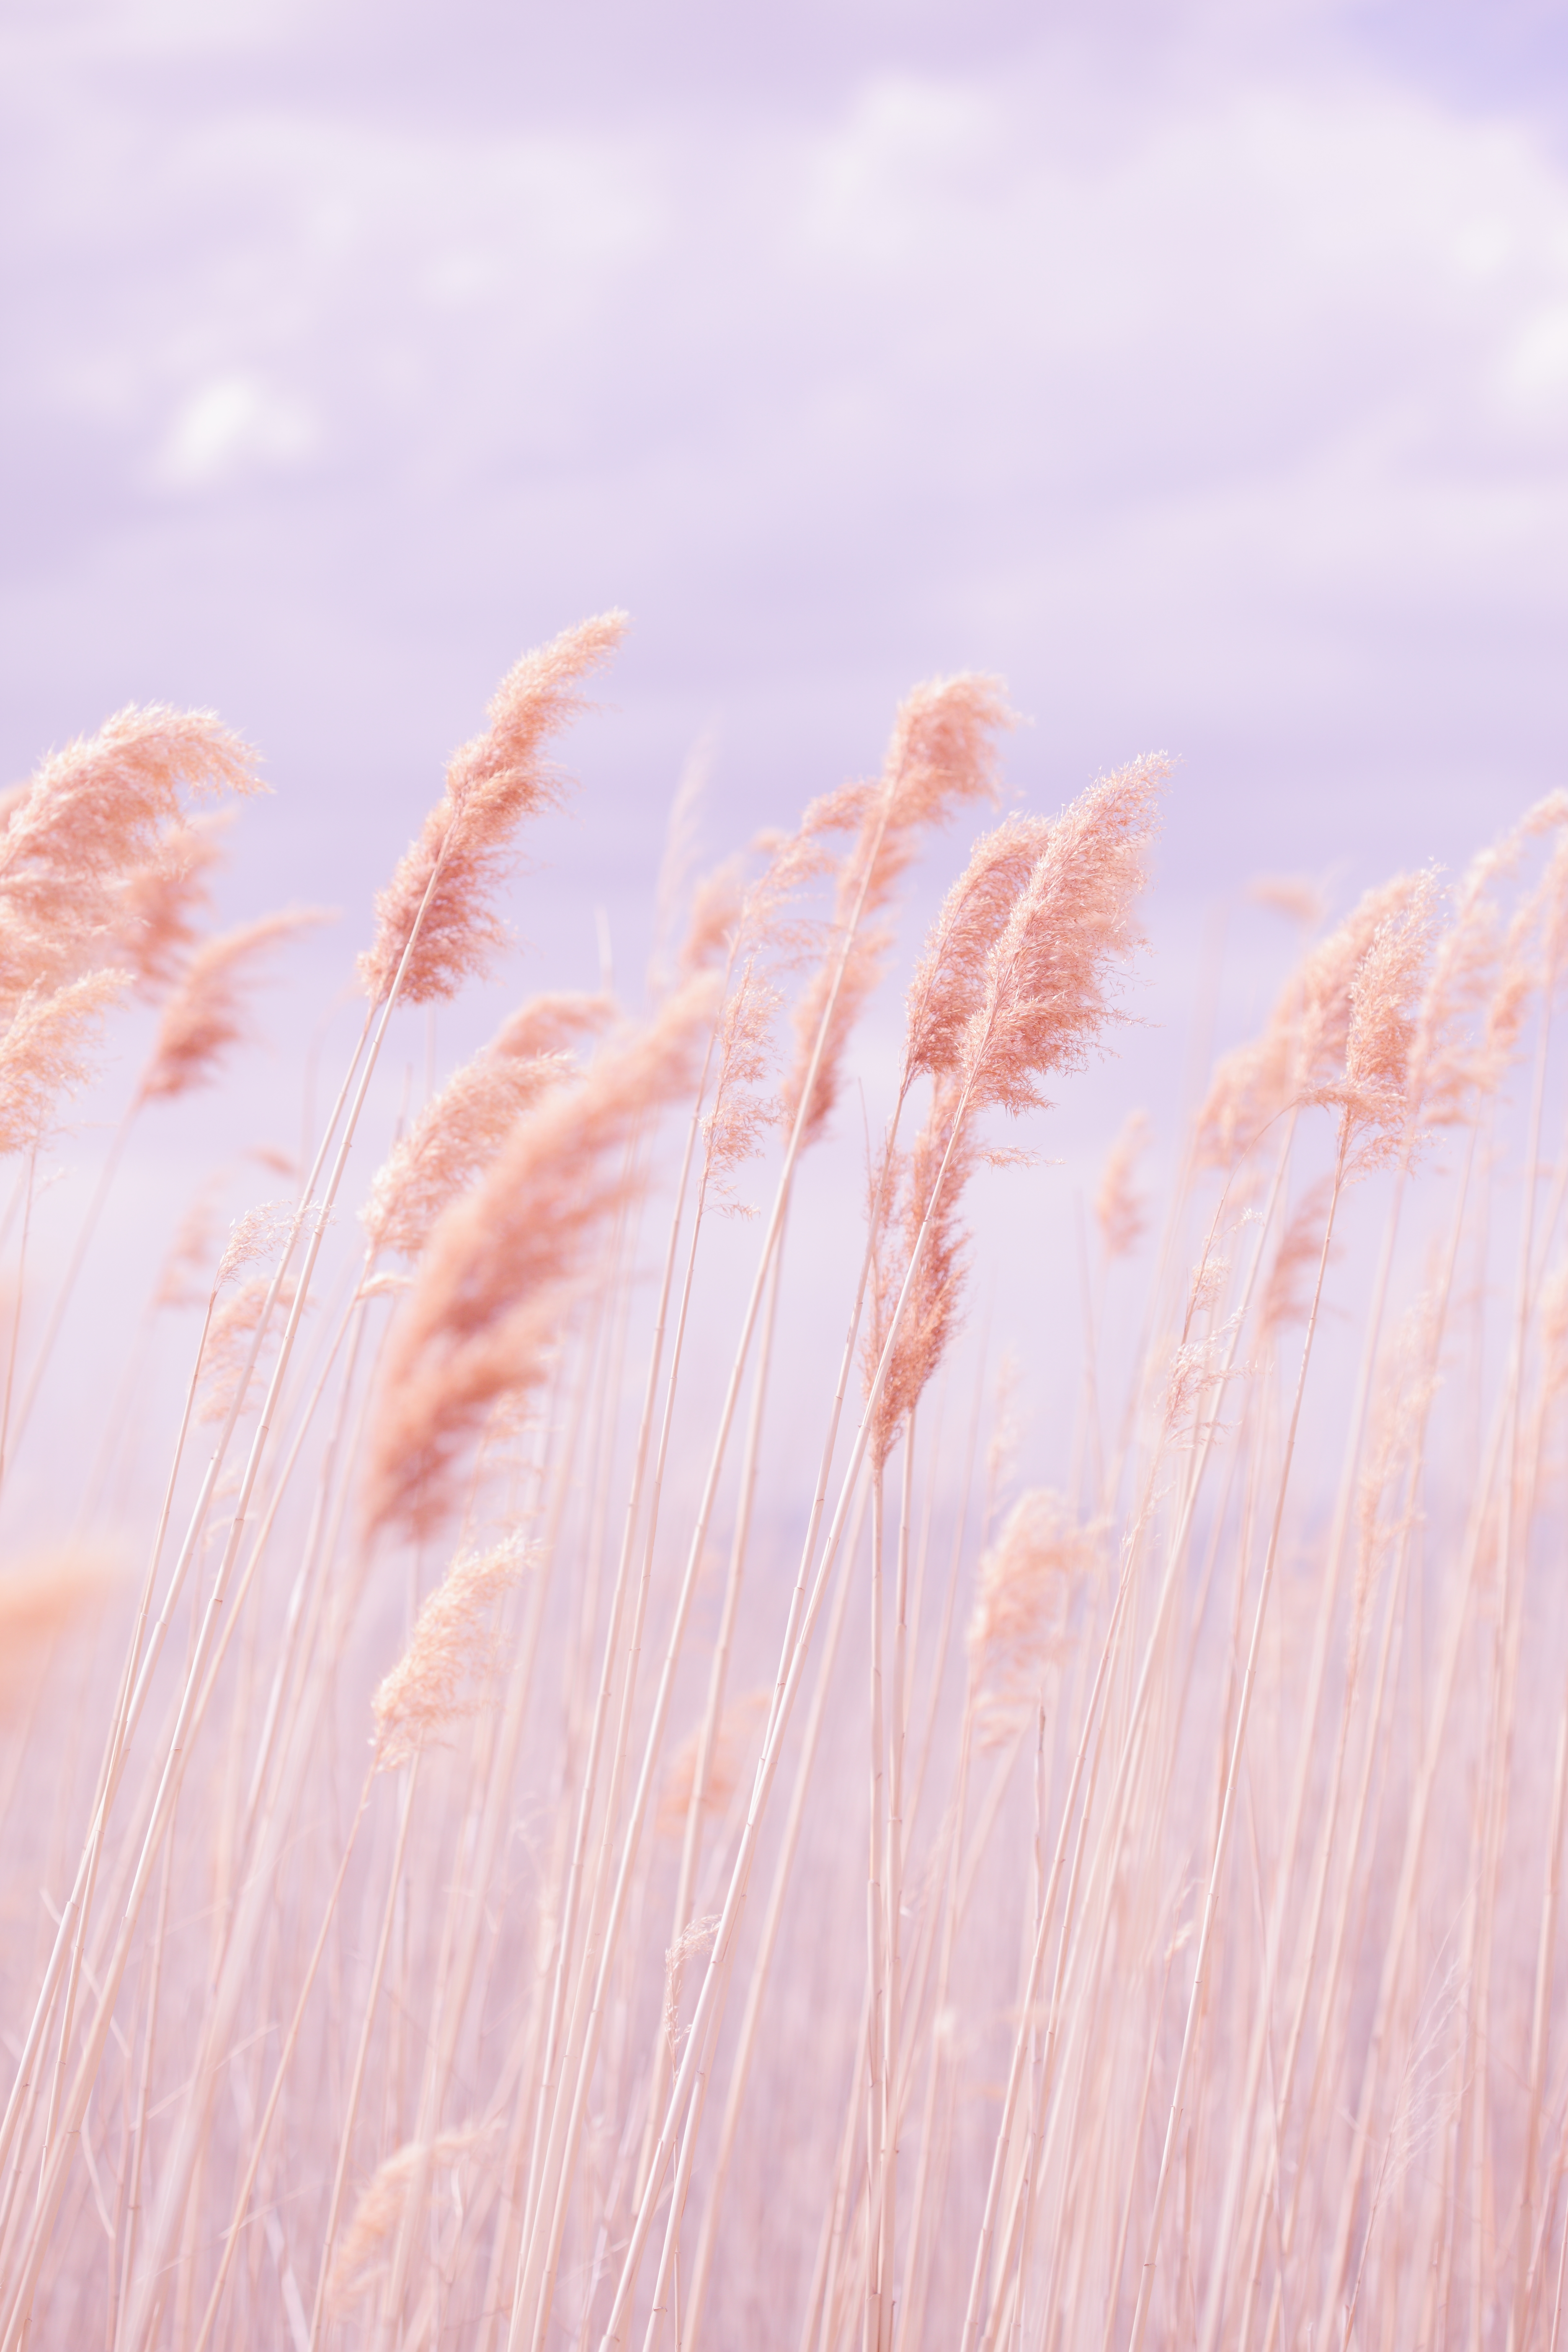 105914 download wallpaper pink, grass, macro, field, wind screensavers and pictures for free